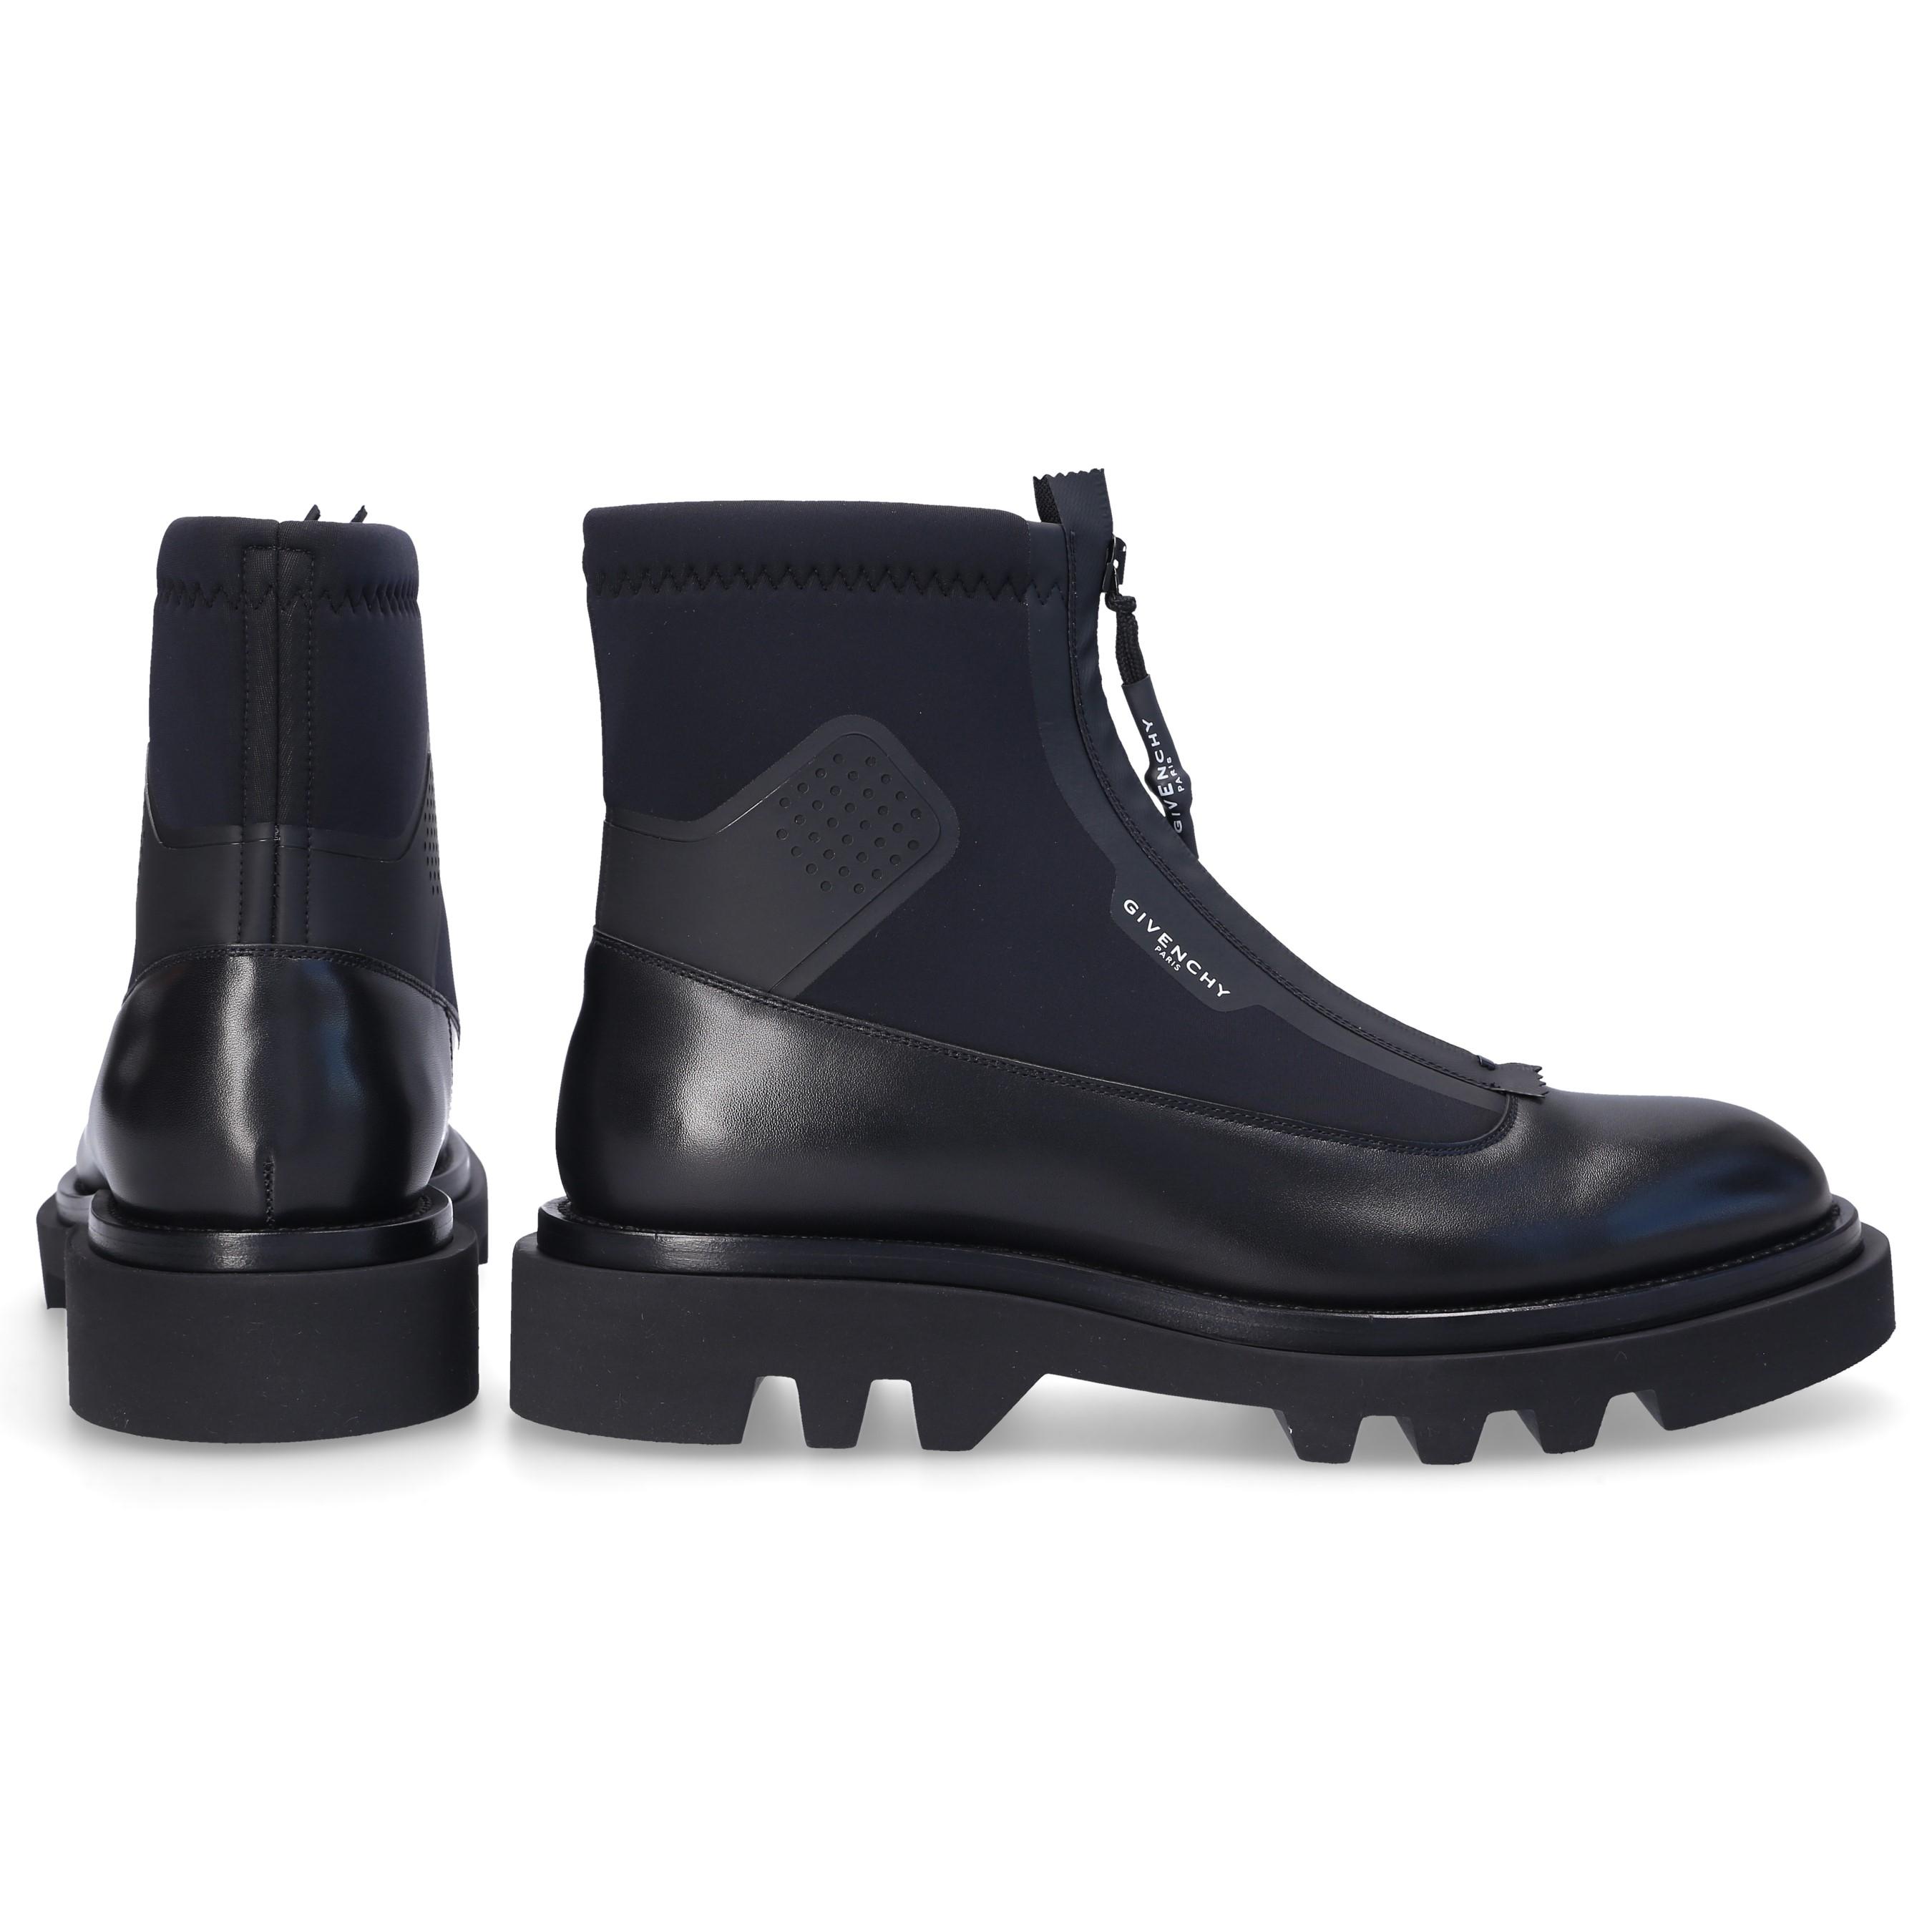 Givenchy Leather Ankle Boots Combat Boot in Black for Men - Lyst